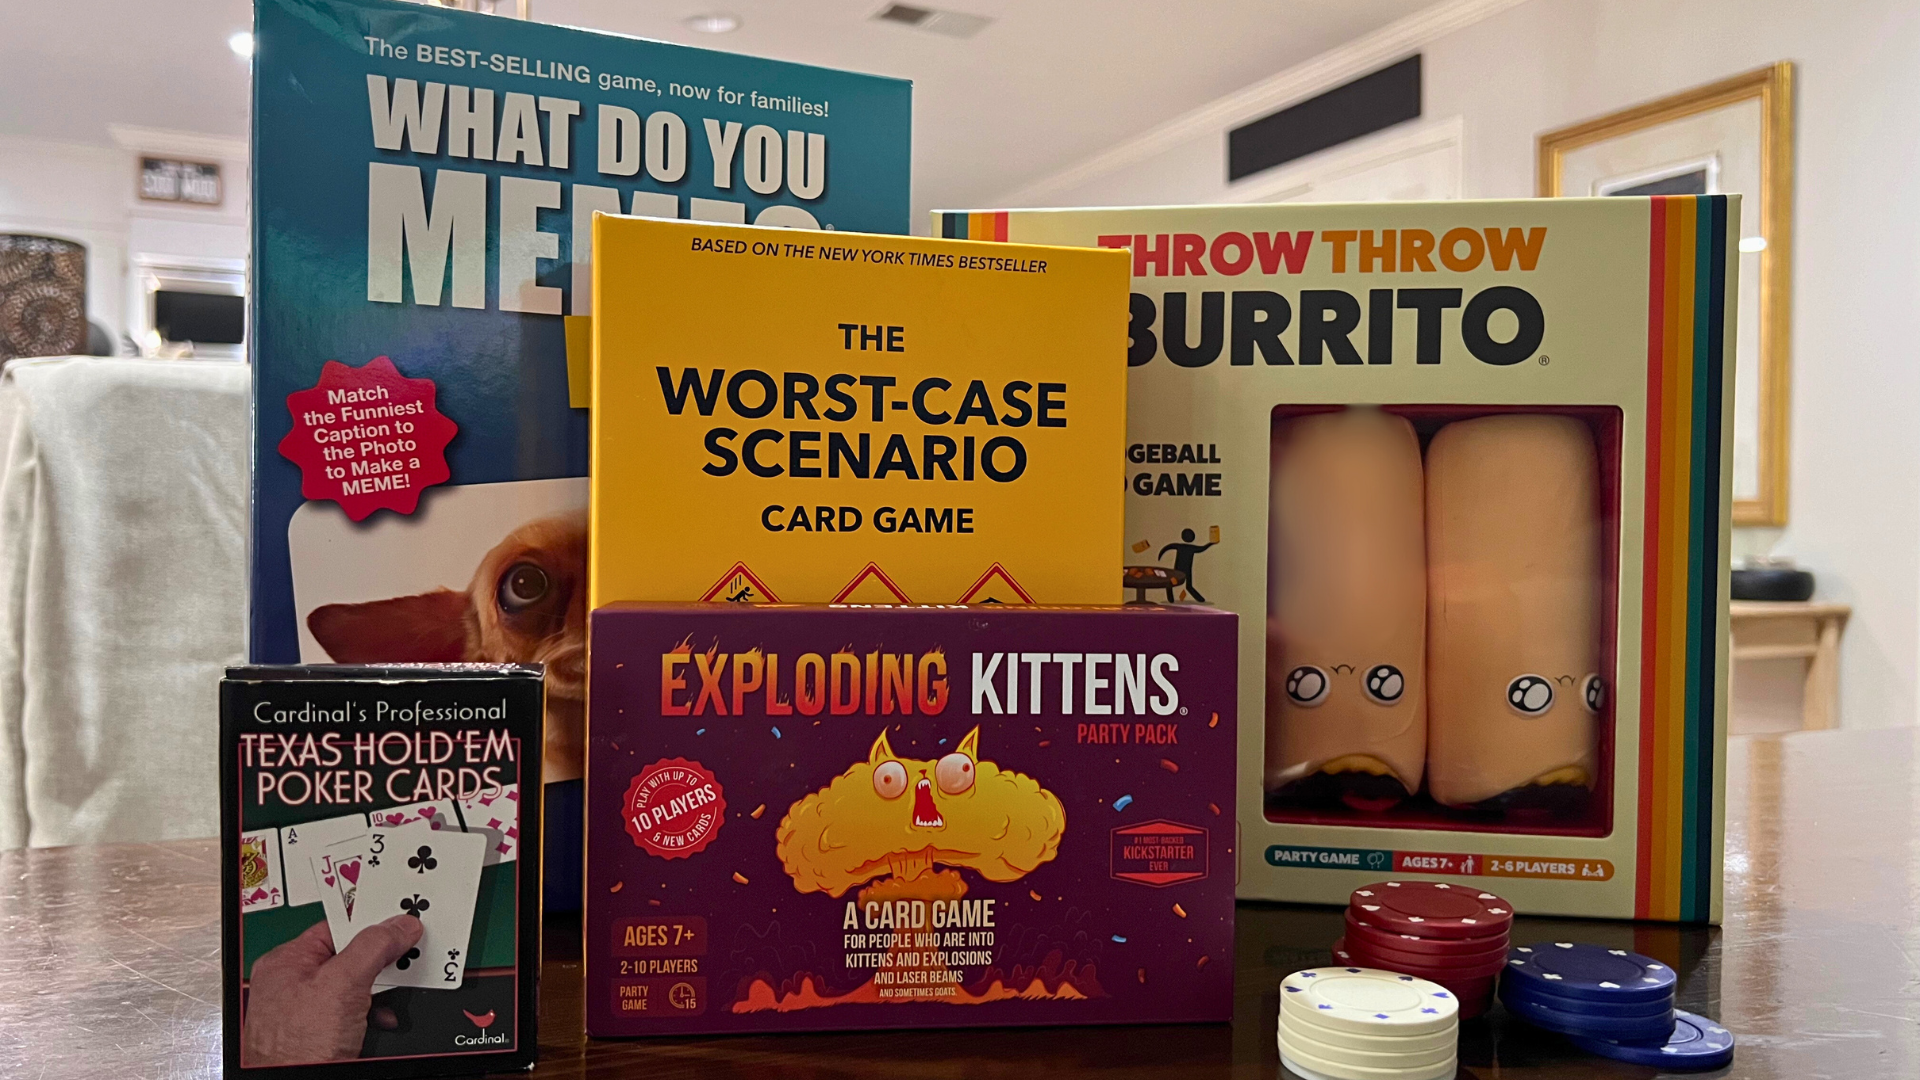 Watch for Exploding Kittens and Flying Burritos :: Family Game Night Ideas